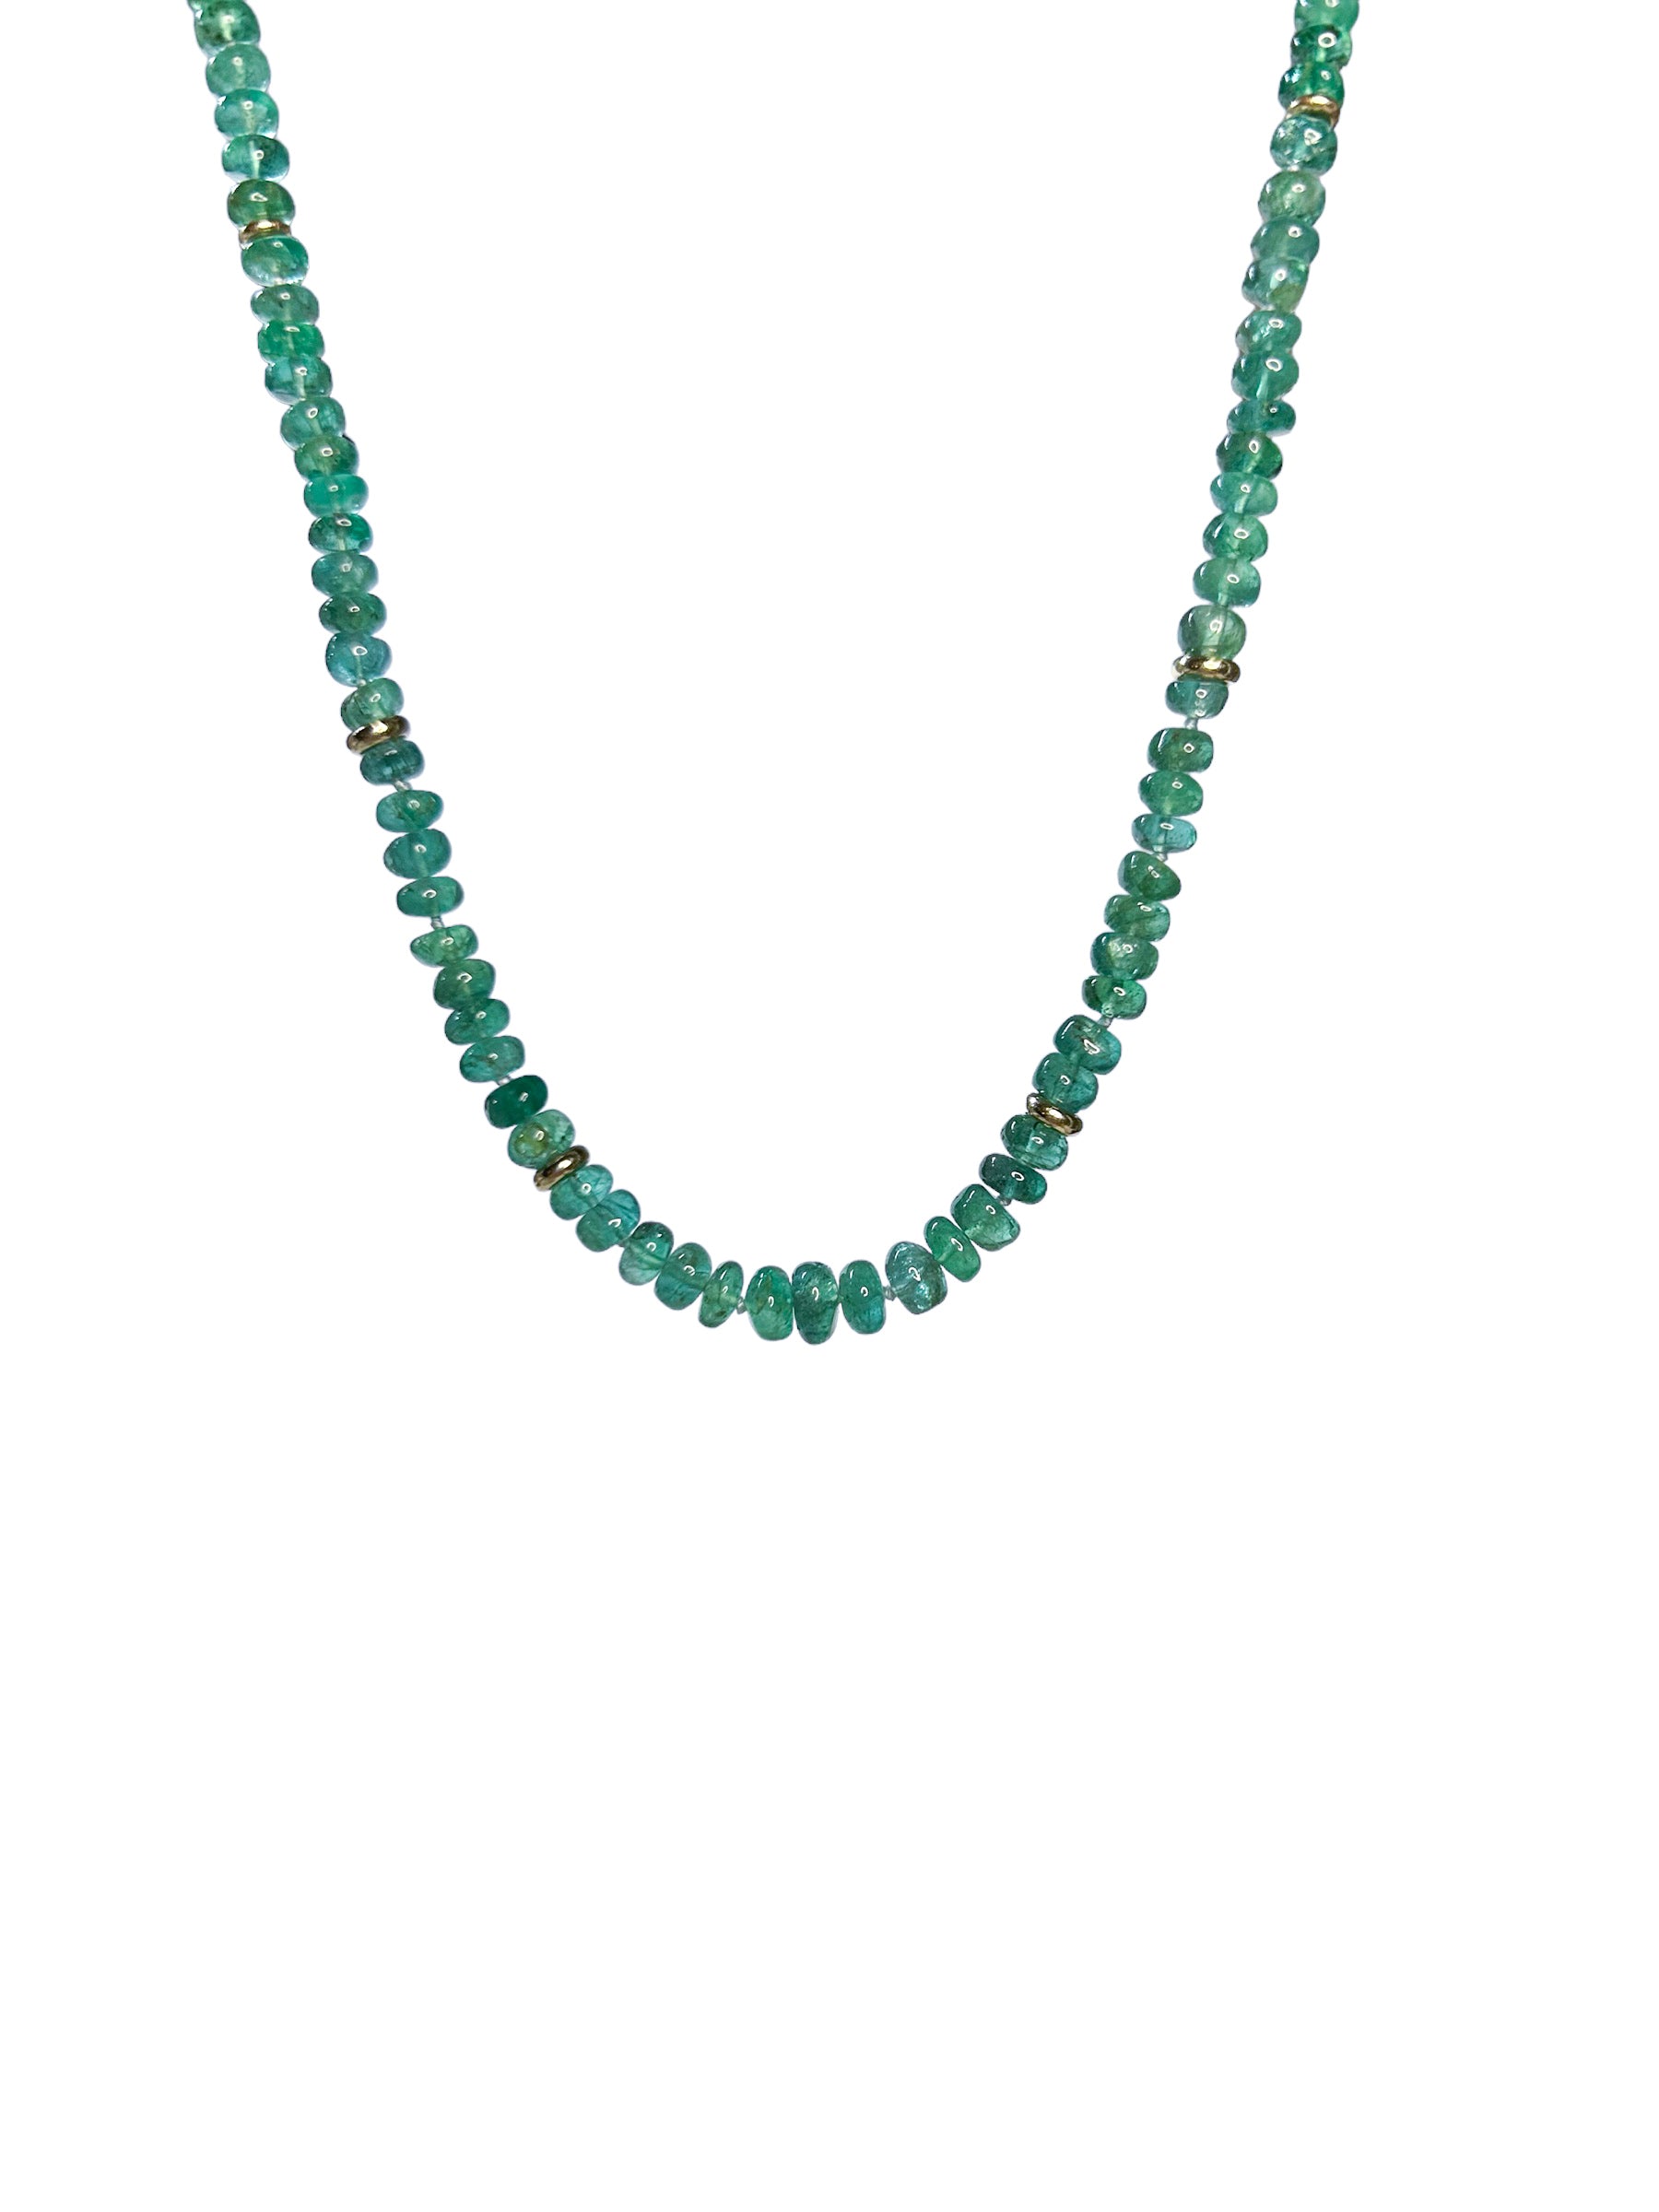 Zambian Emerald Bead Necklace with 14k Solid Gold